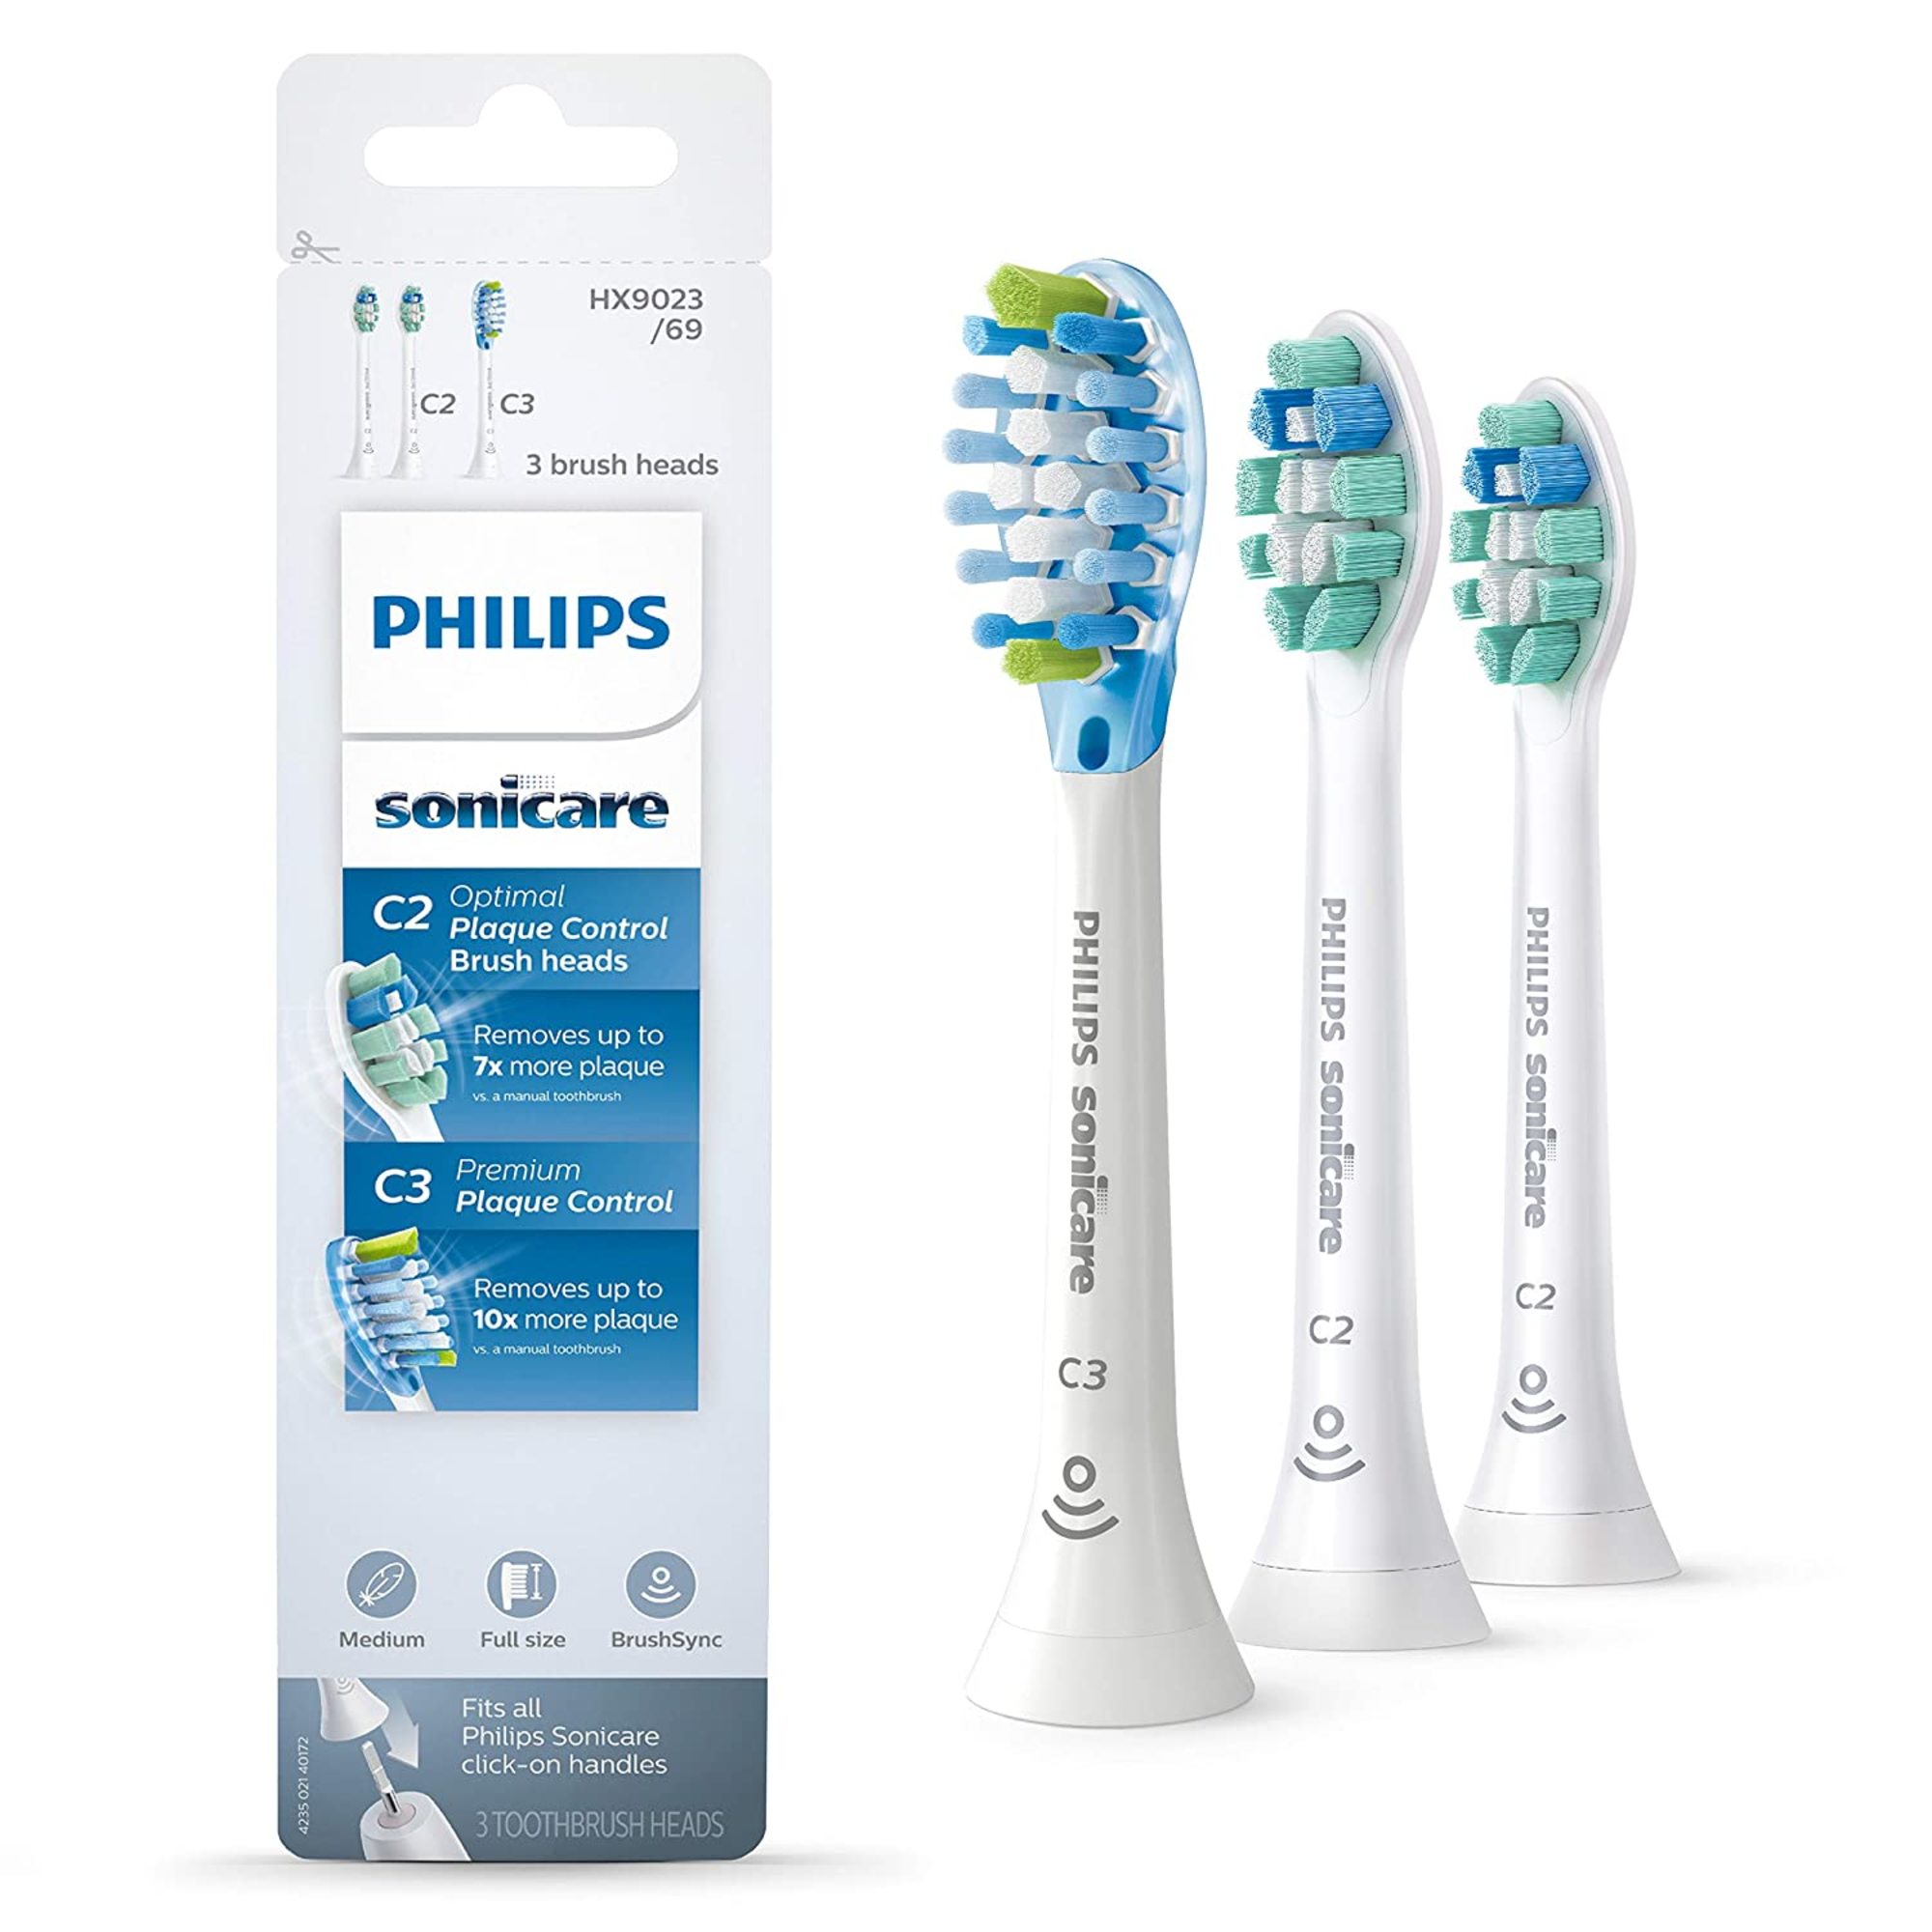 Philips Sonicare Replacement Toothbrush Head Variety Pack, HX9023/69, White 3-pk - image 1 of 17